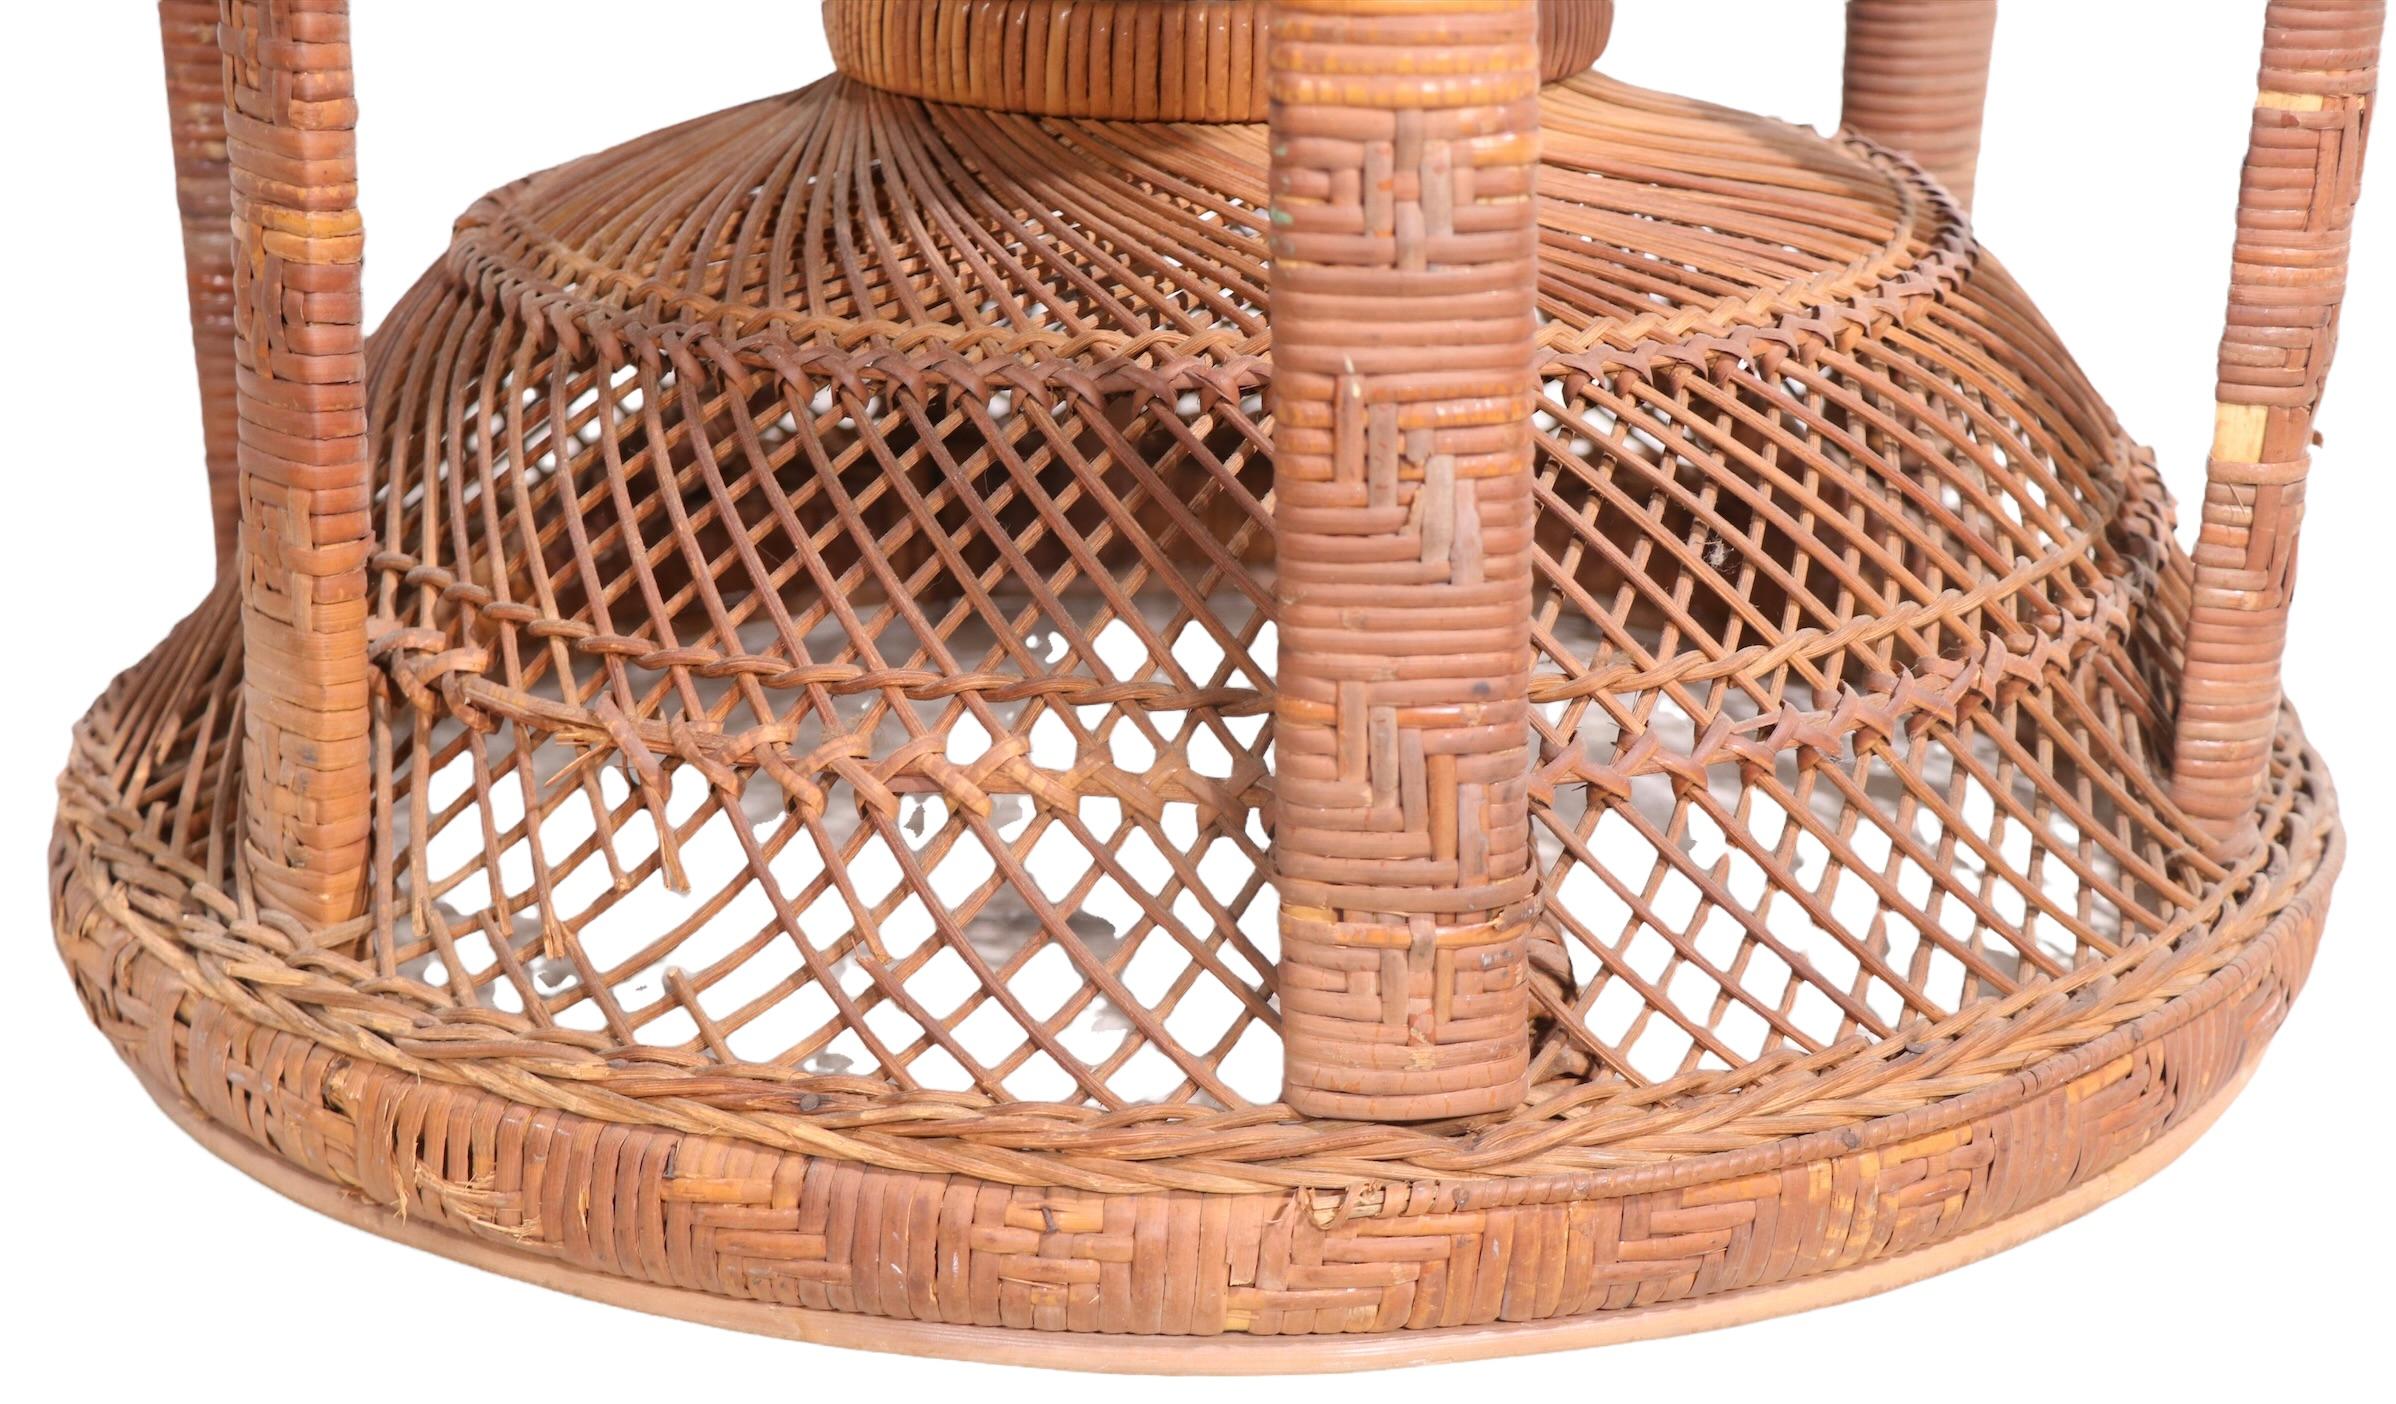 Iconic wicker Emmanuelle, or Peacock chair in very good, original condition. This dramatic example features a large back, intricately woven armrests on a twist waisted form base, it still retains the period and original Made in Hong Kong paper